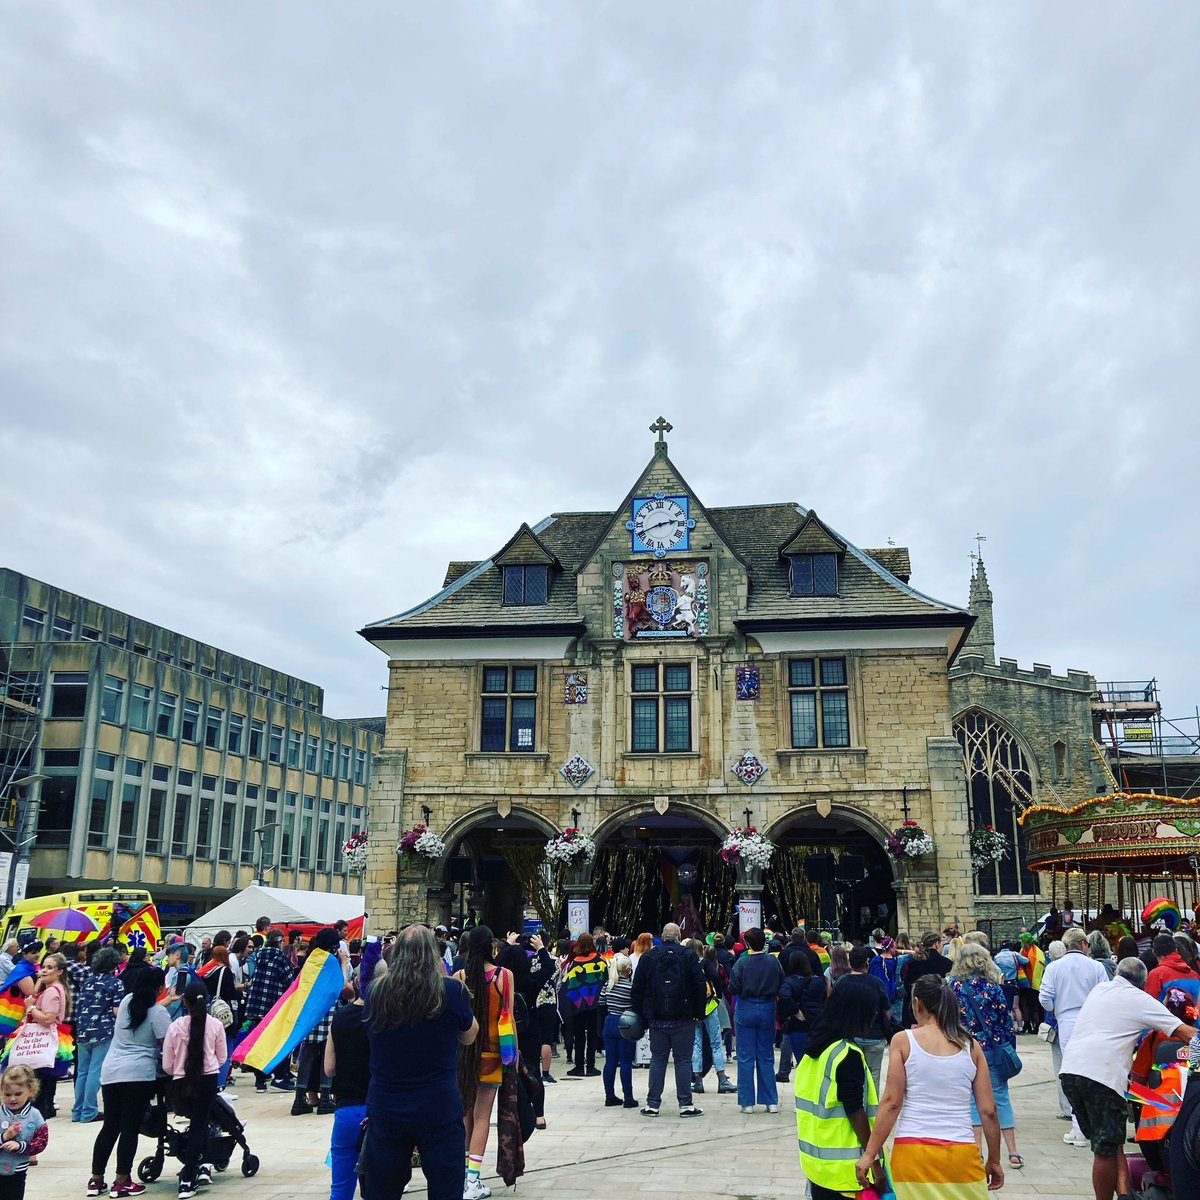 A million dreams is all it’s gonna take…The @PeterbPrideUK street party is in full swing - come on down and enjoy the performances until 6pm in Cathedral Square.